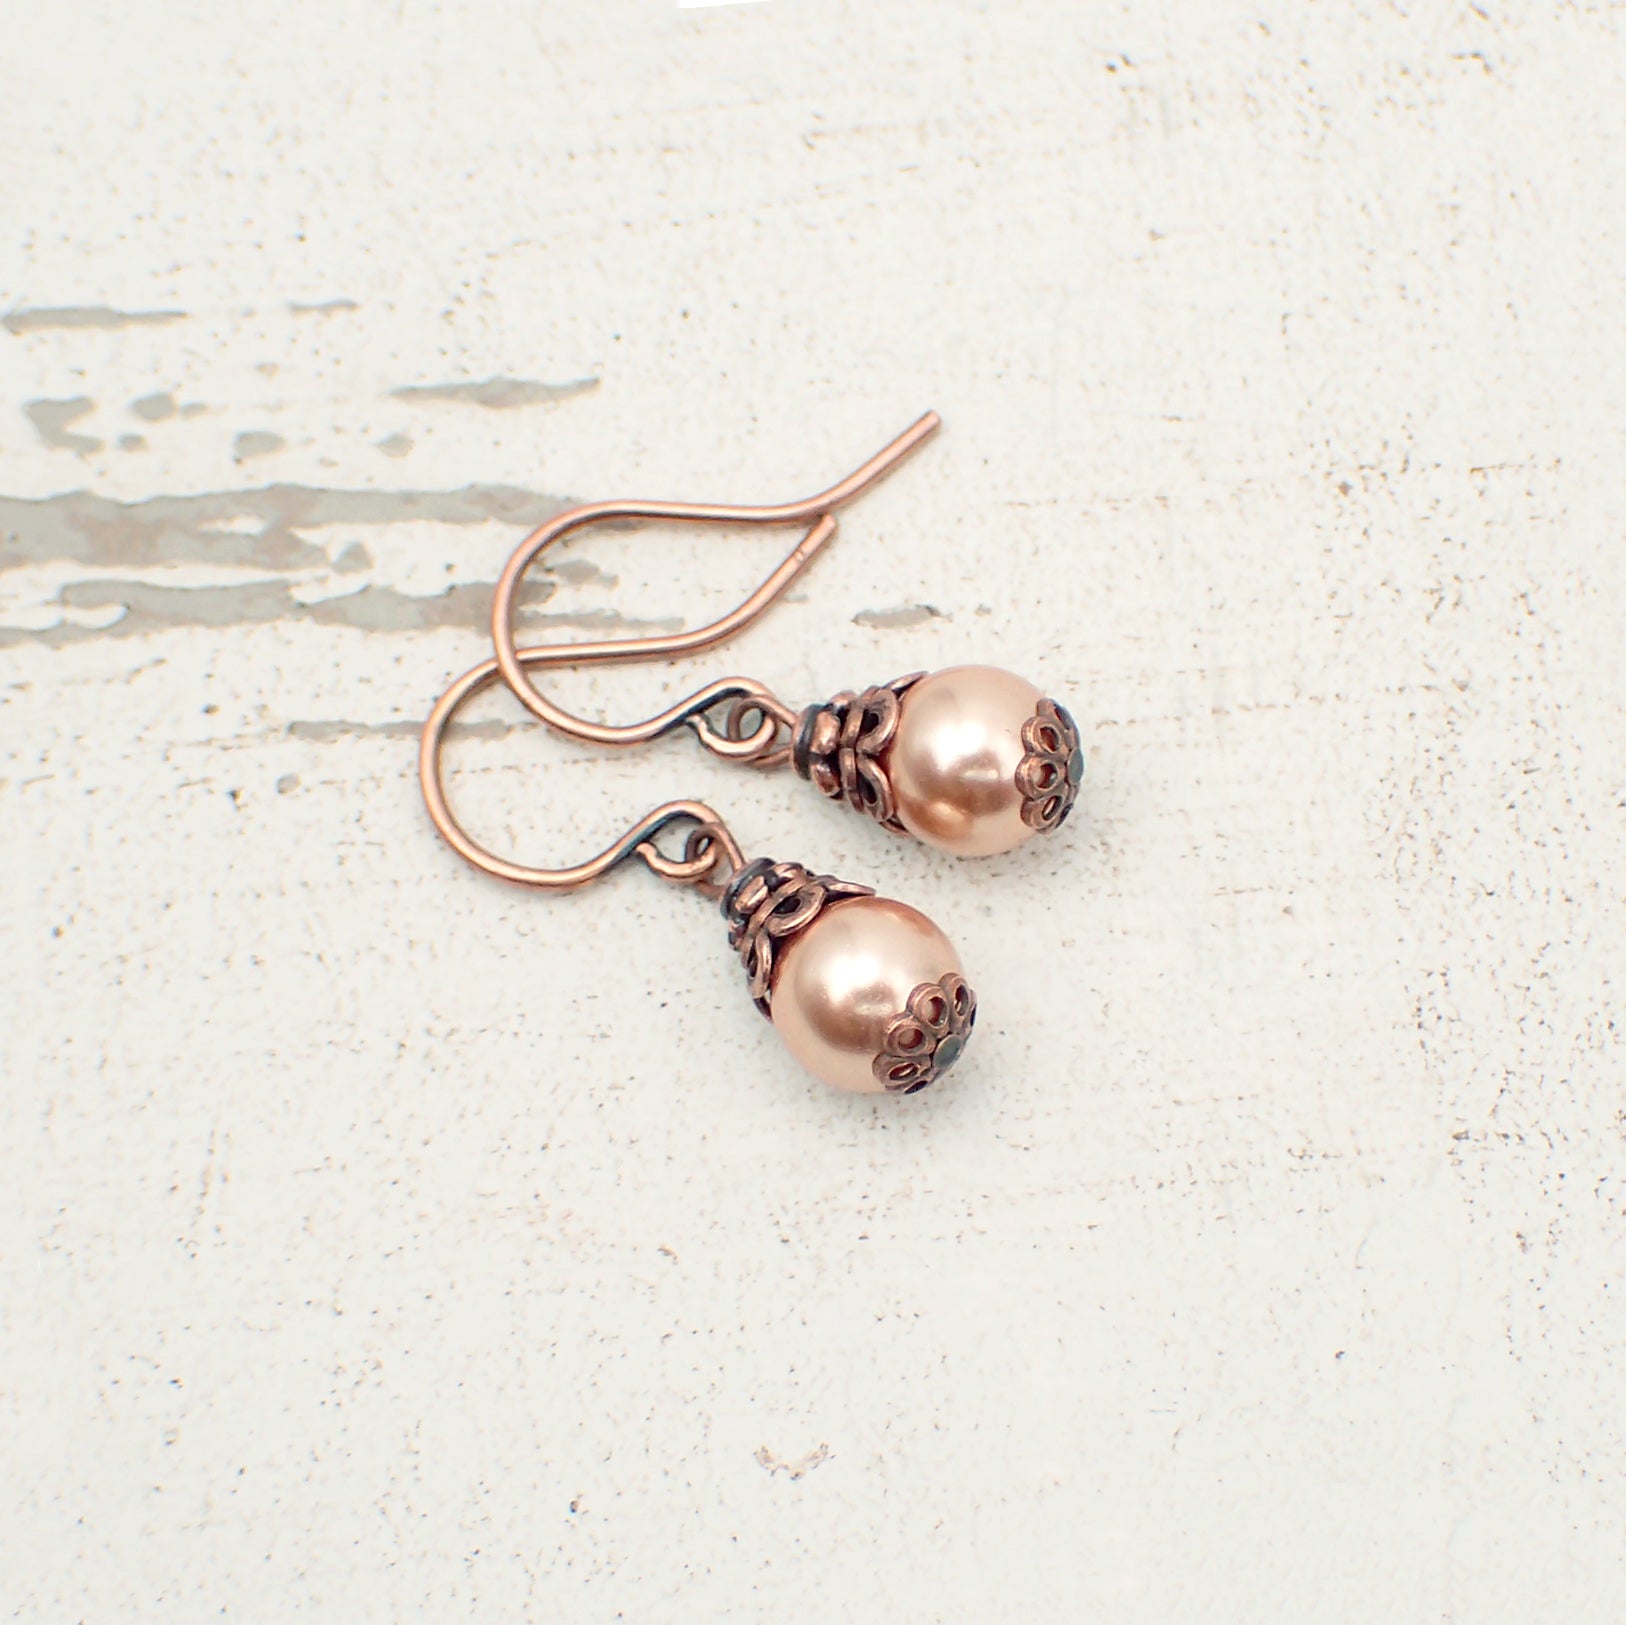 Dainty little rose gold-colored crystal pearls dressed with antiqued copper details.